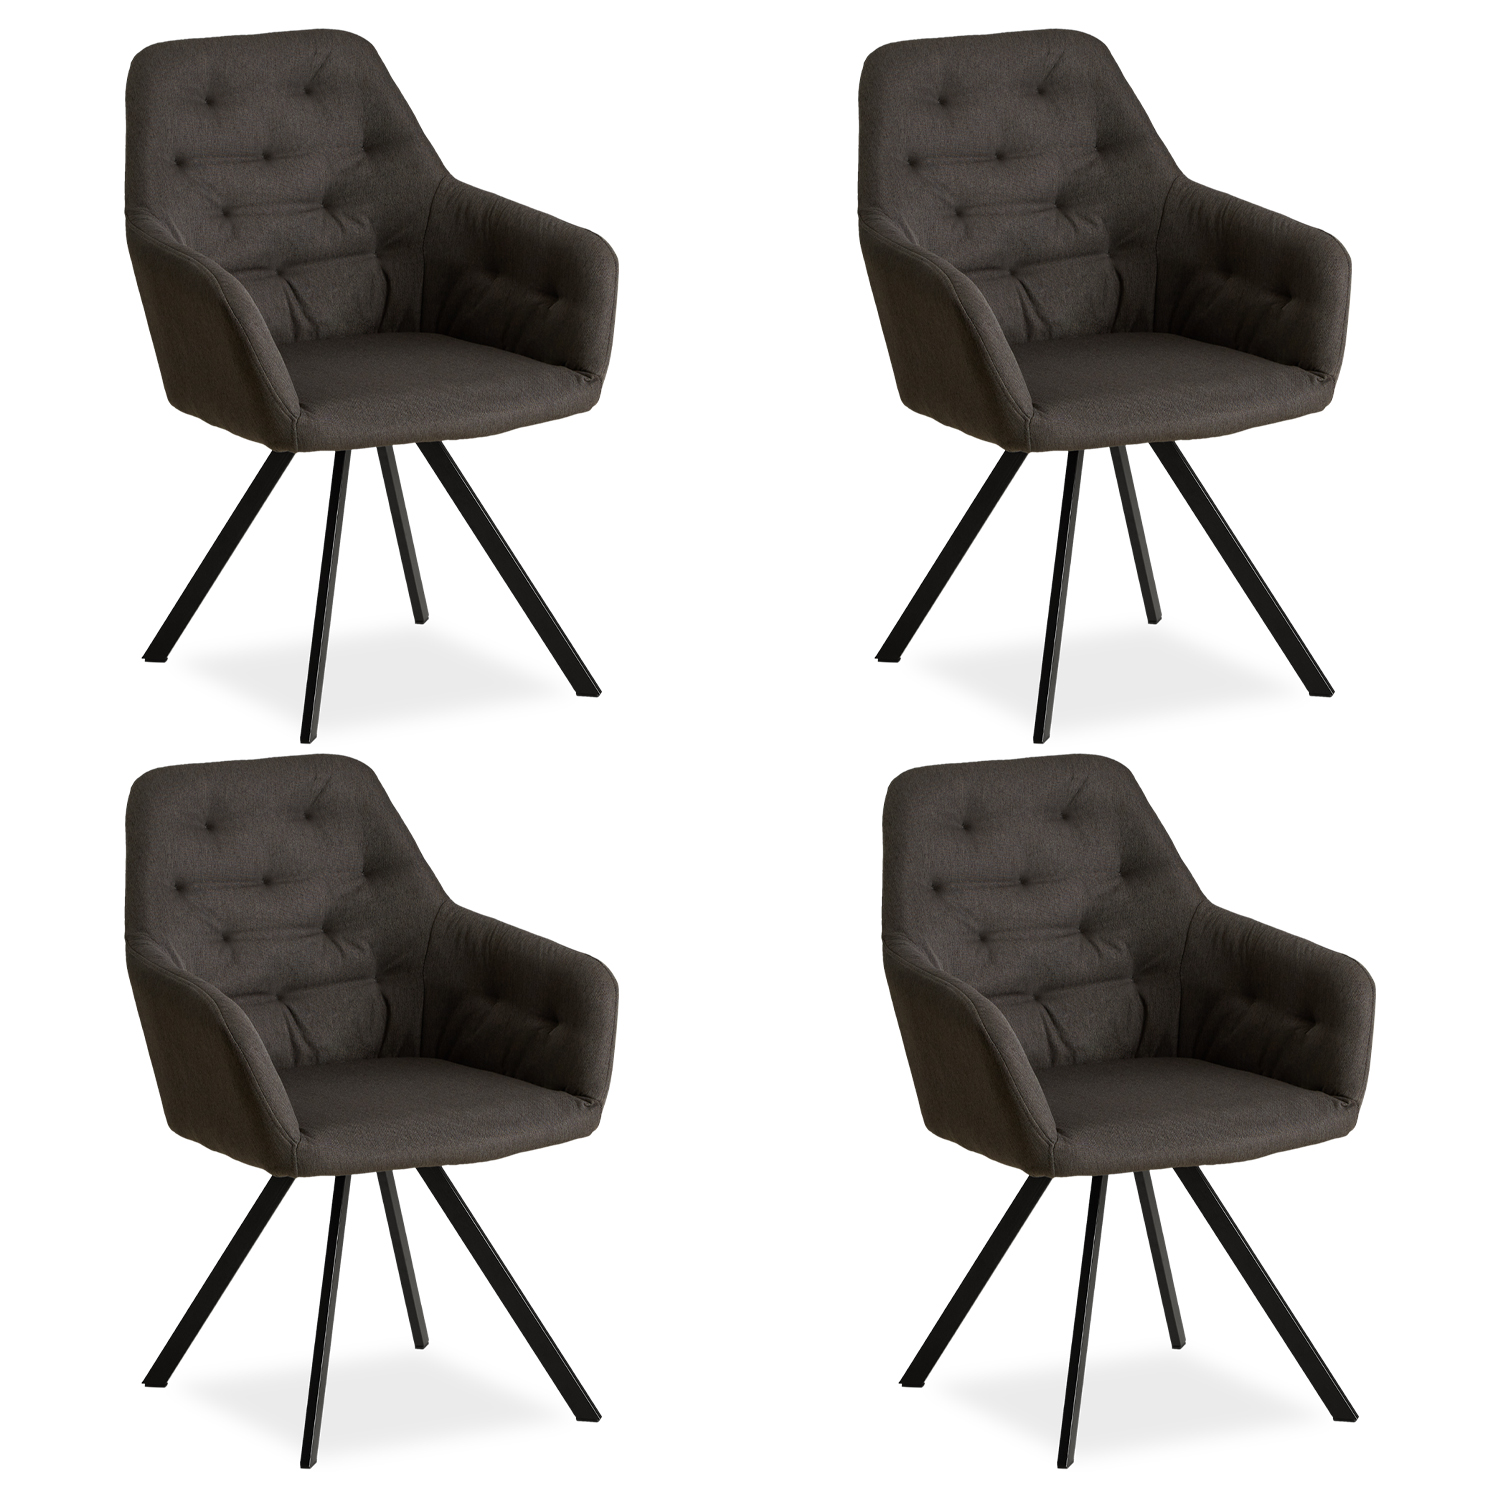 Dining Chair Set of 4 Egg Chairs Anthracite Armchairs Dining Room Chairs Upholstered Chairs Eames Chairs